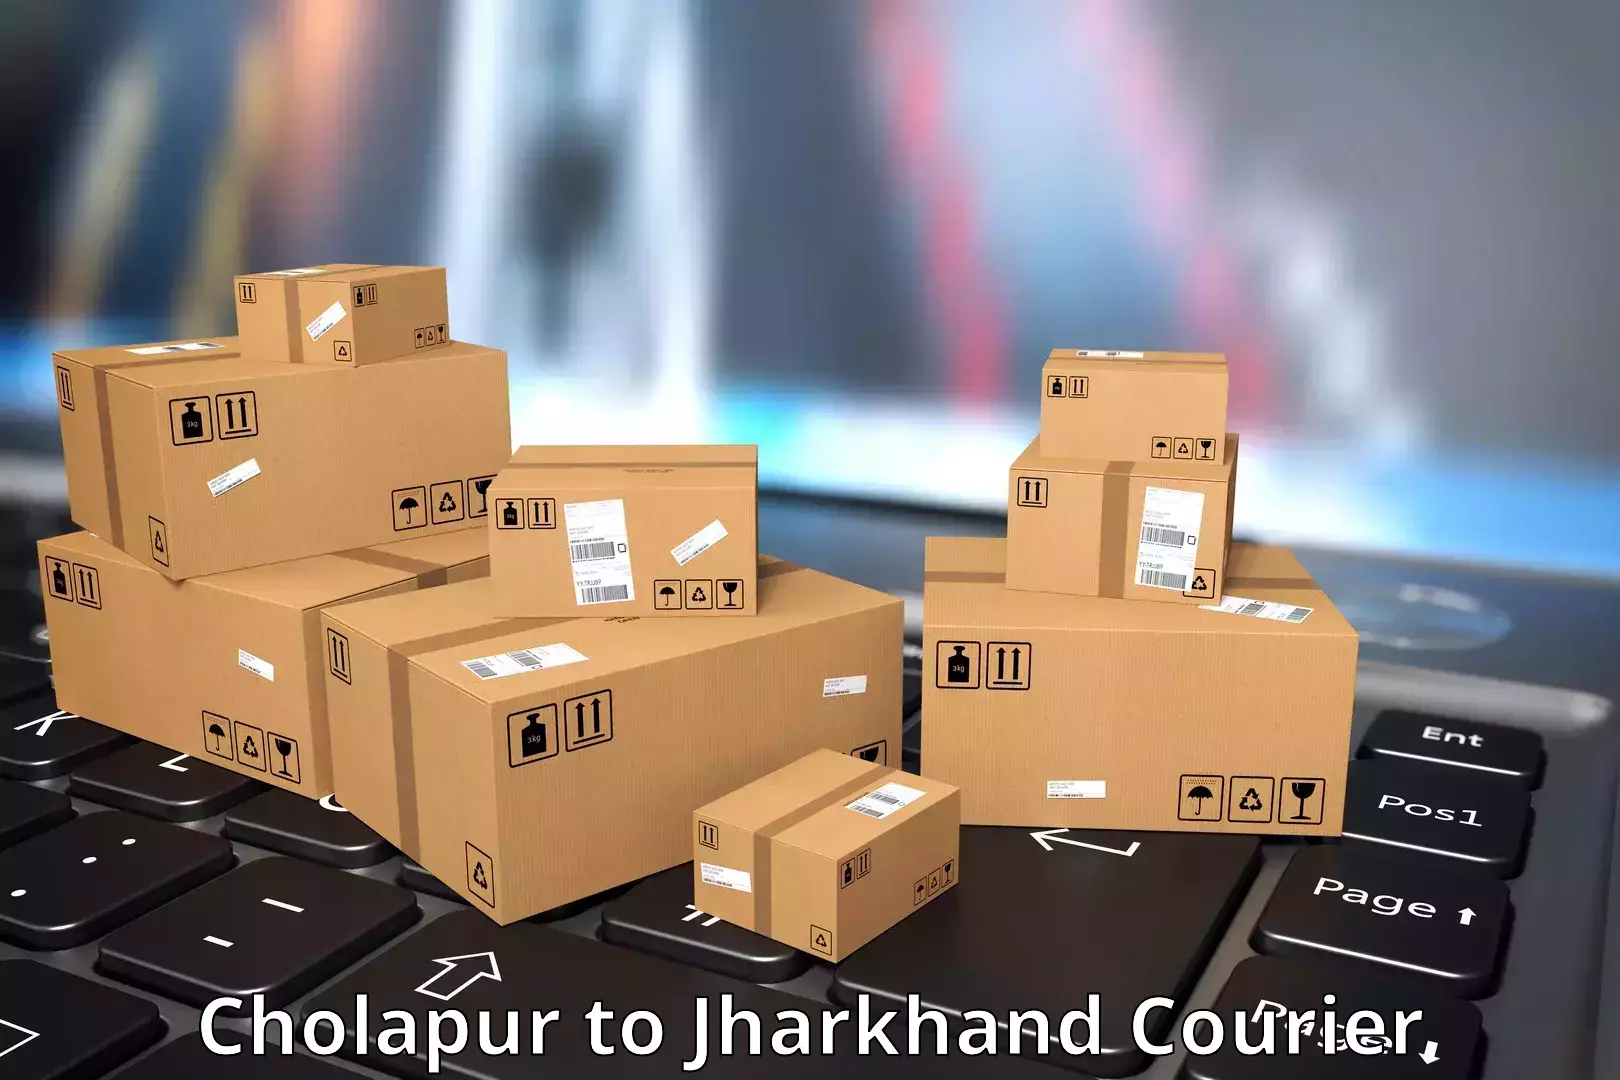 On-demand courier Cholapur to Dhanbad